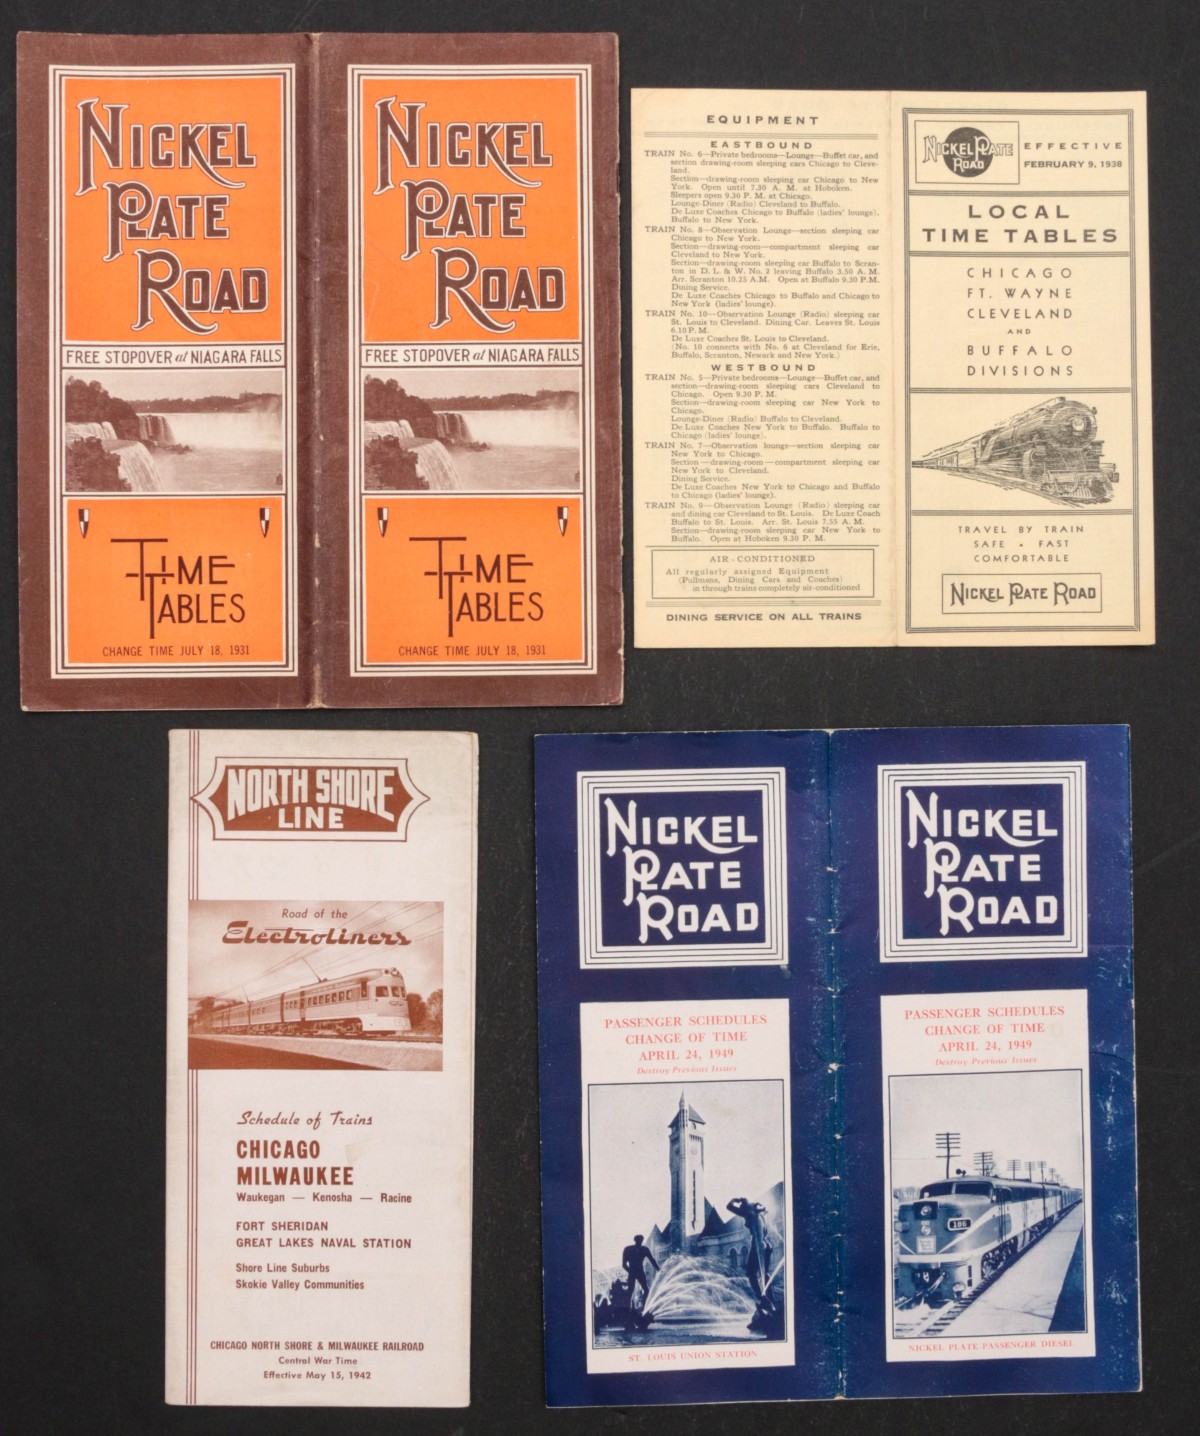 NICKEL PLATE ROAD AND NORTH SHORE LINE RR TIMETABLES